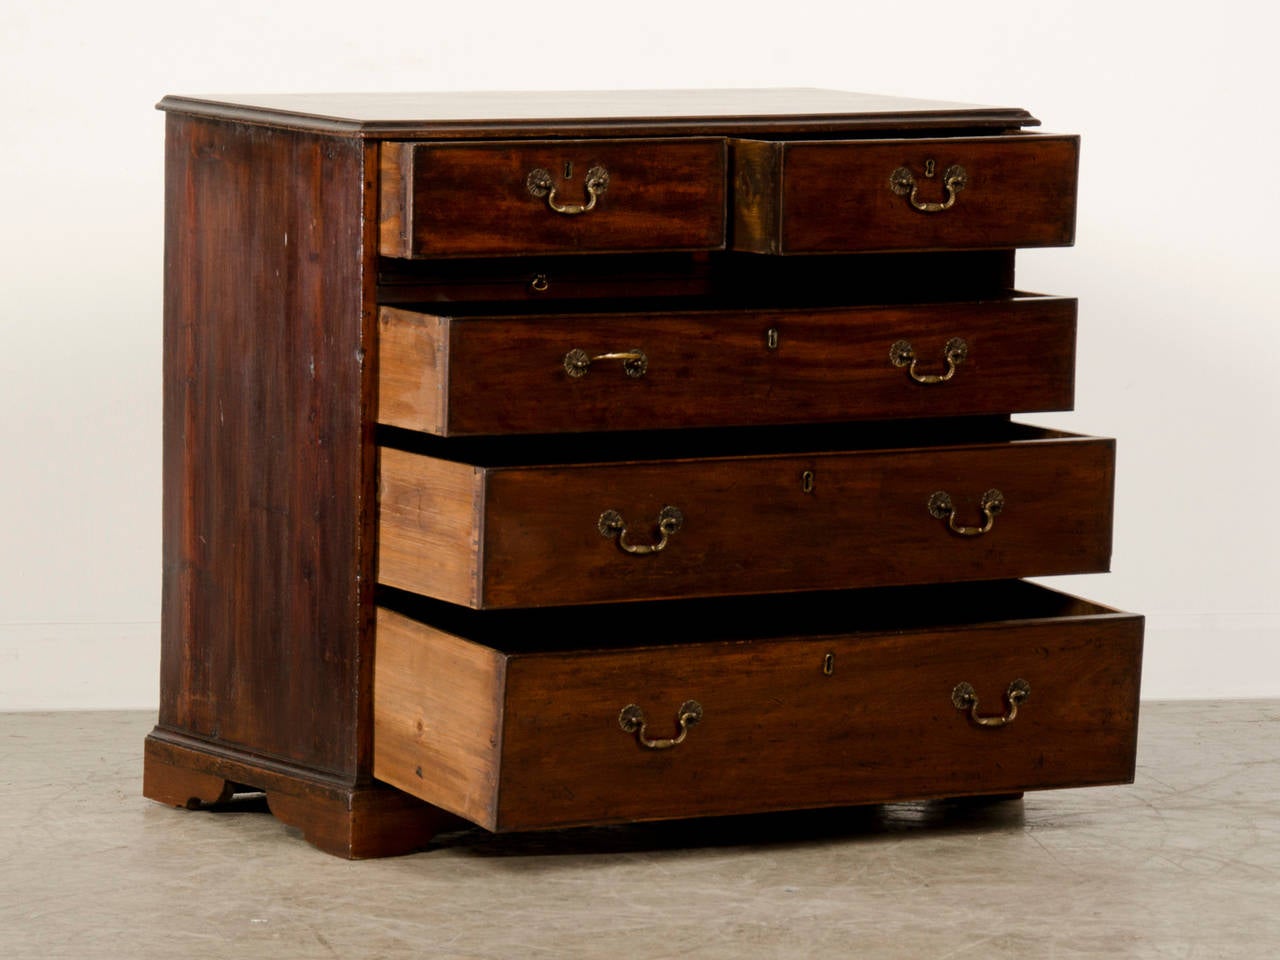 A George III period mahogany chest of drawers from England c.1830 having a dressing/brushing slide standing on bracket feet.